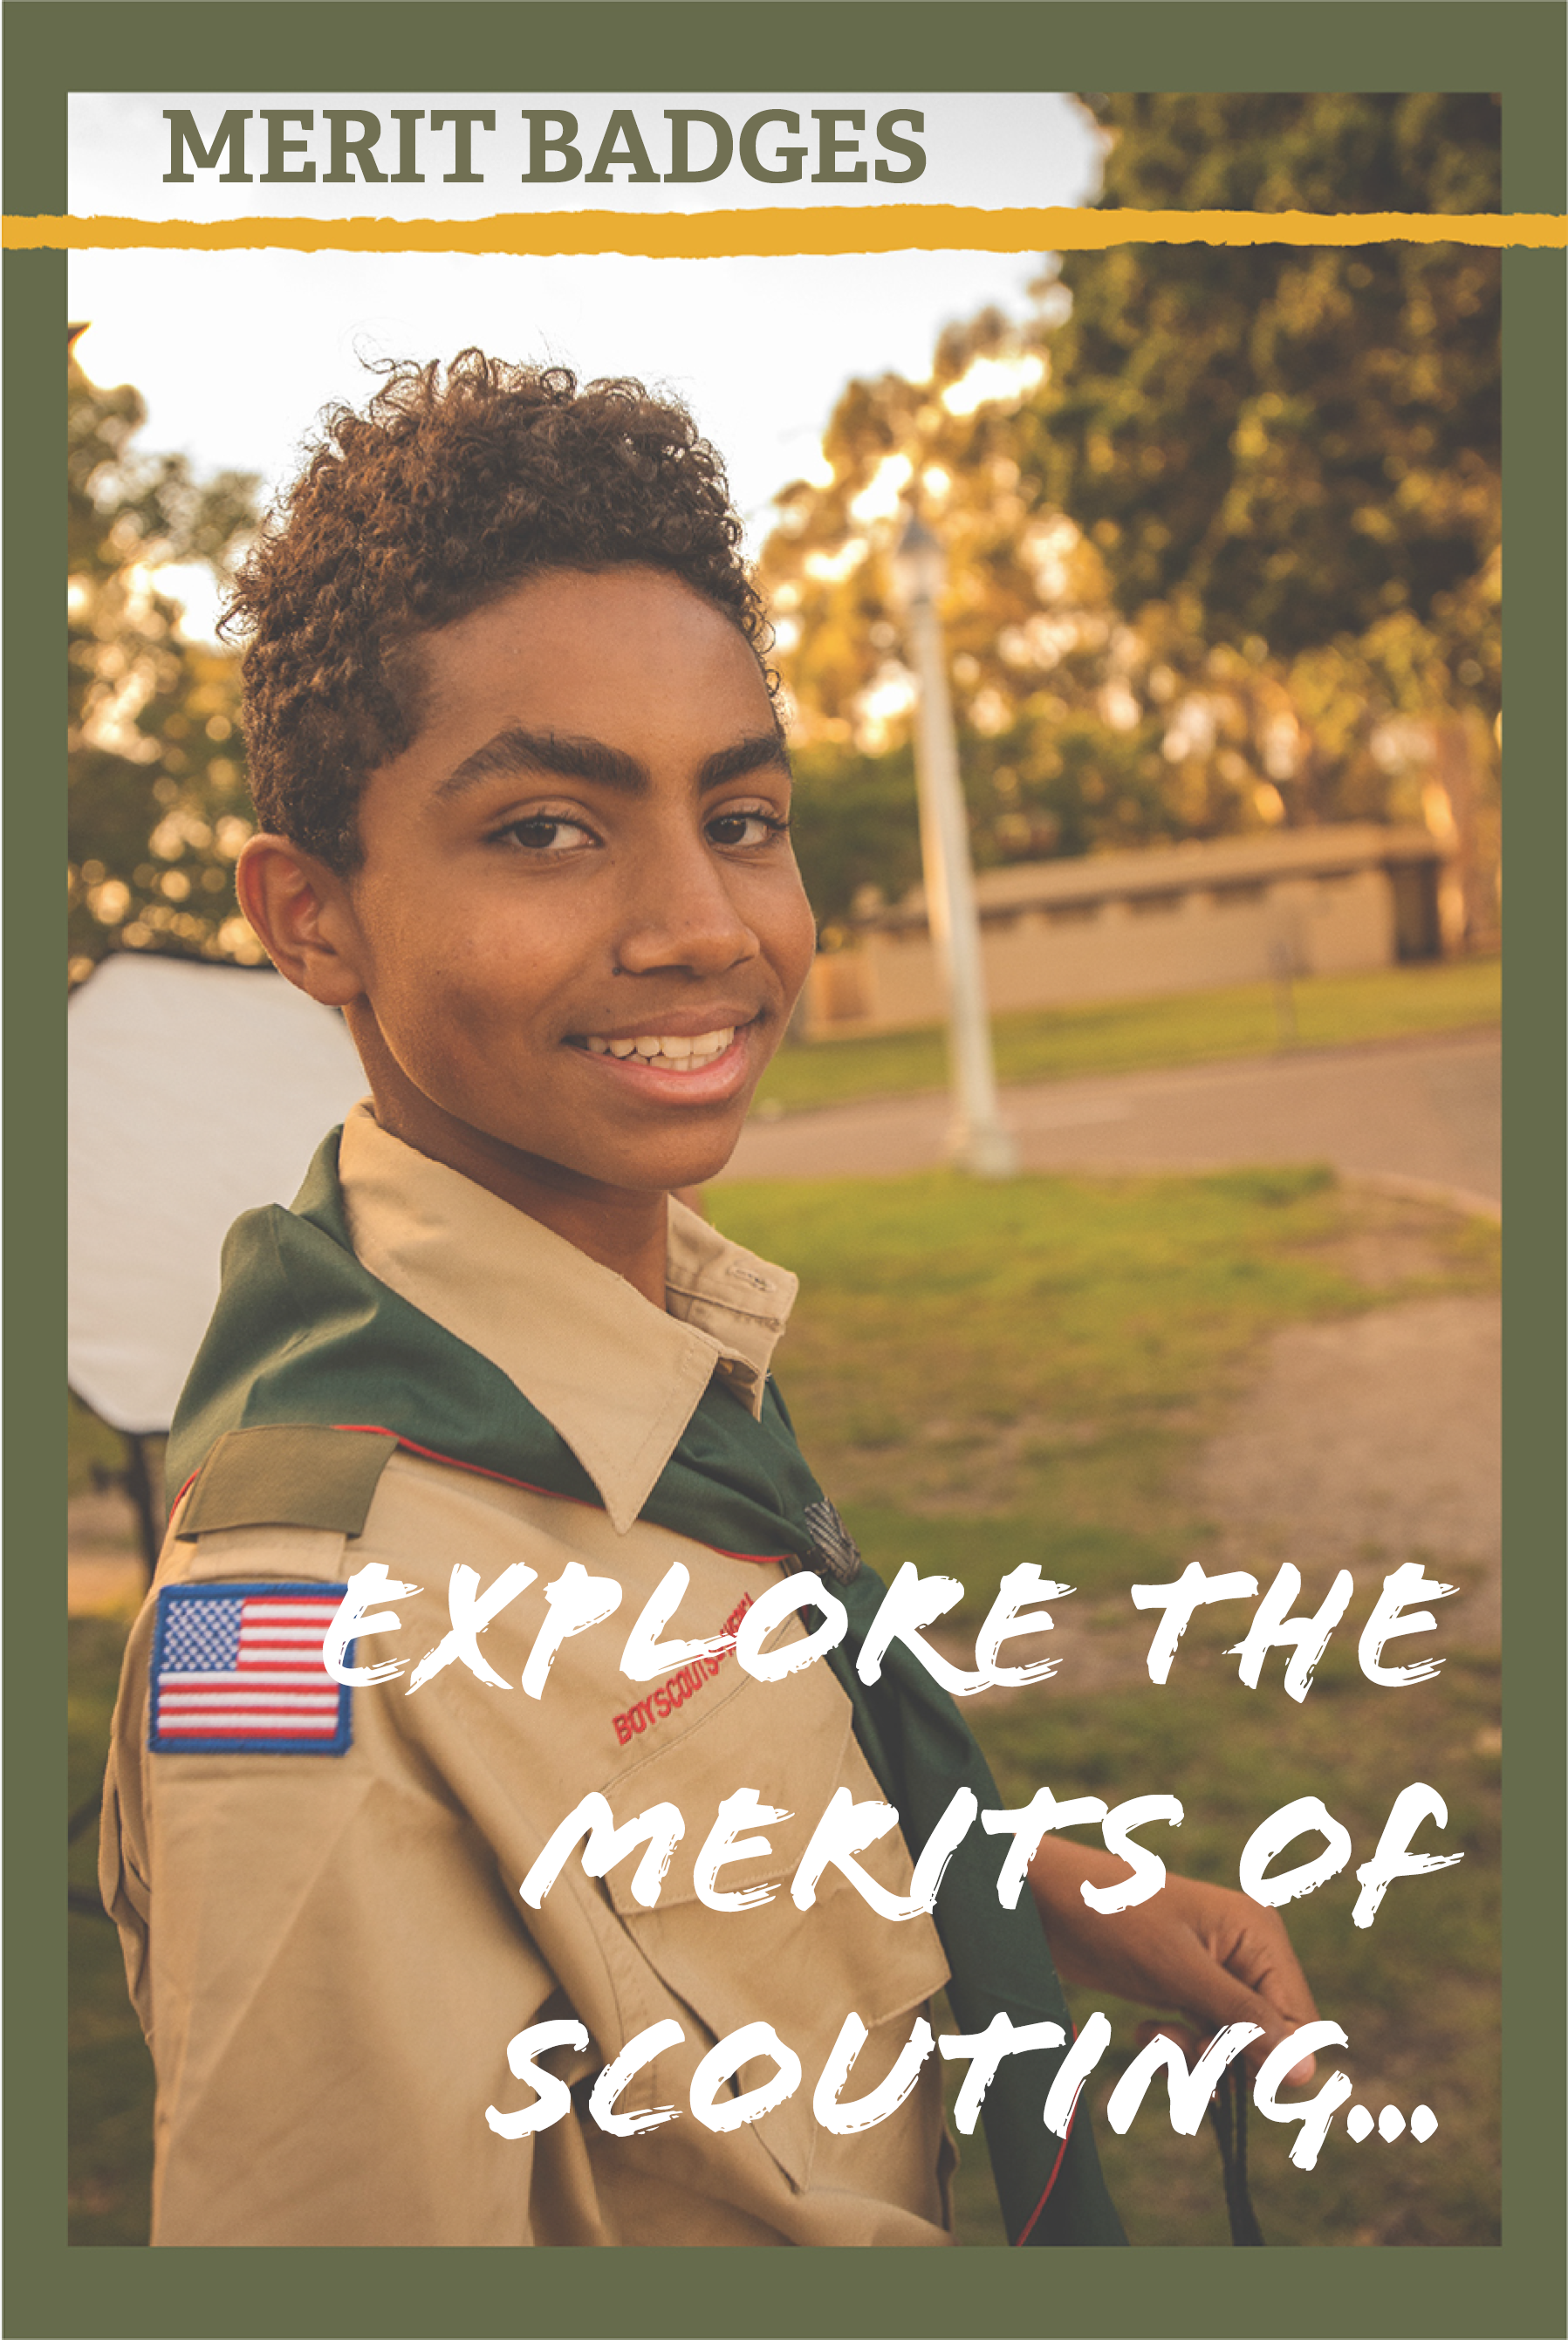 Piedmont Council Boy Scouts of America - Prepared for Life